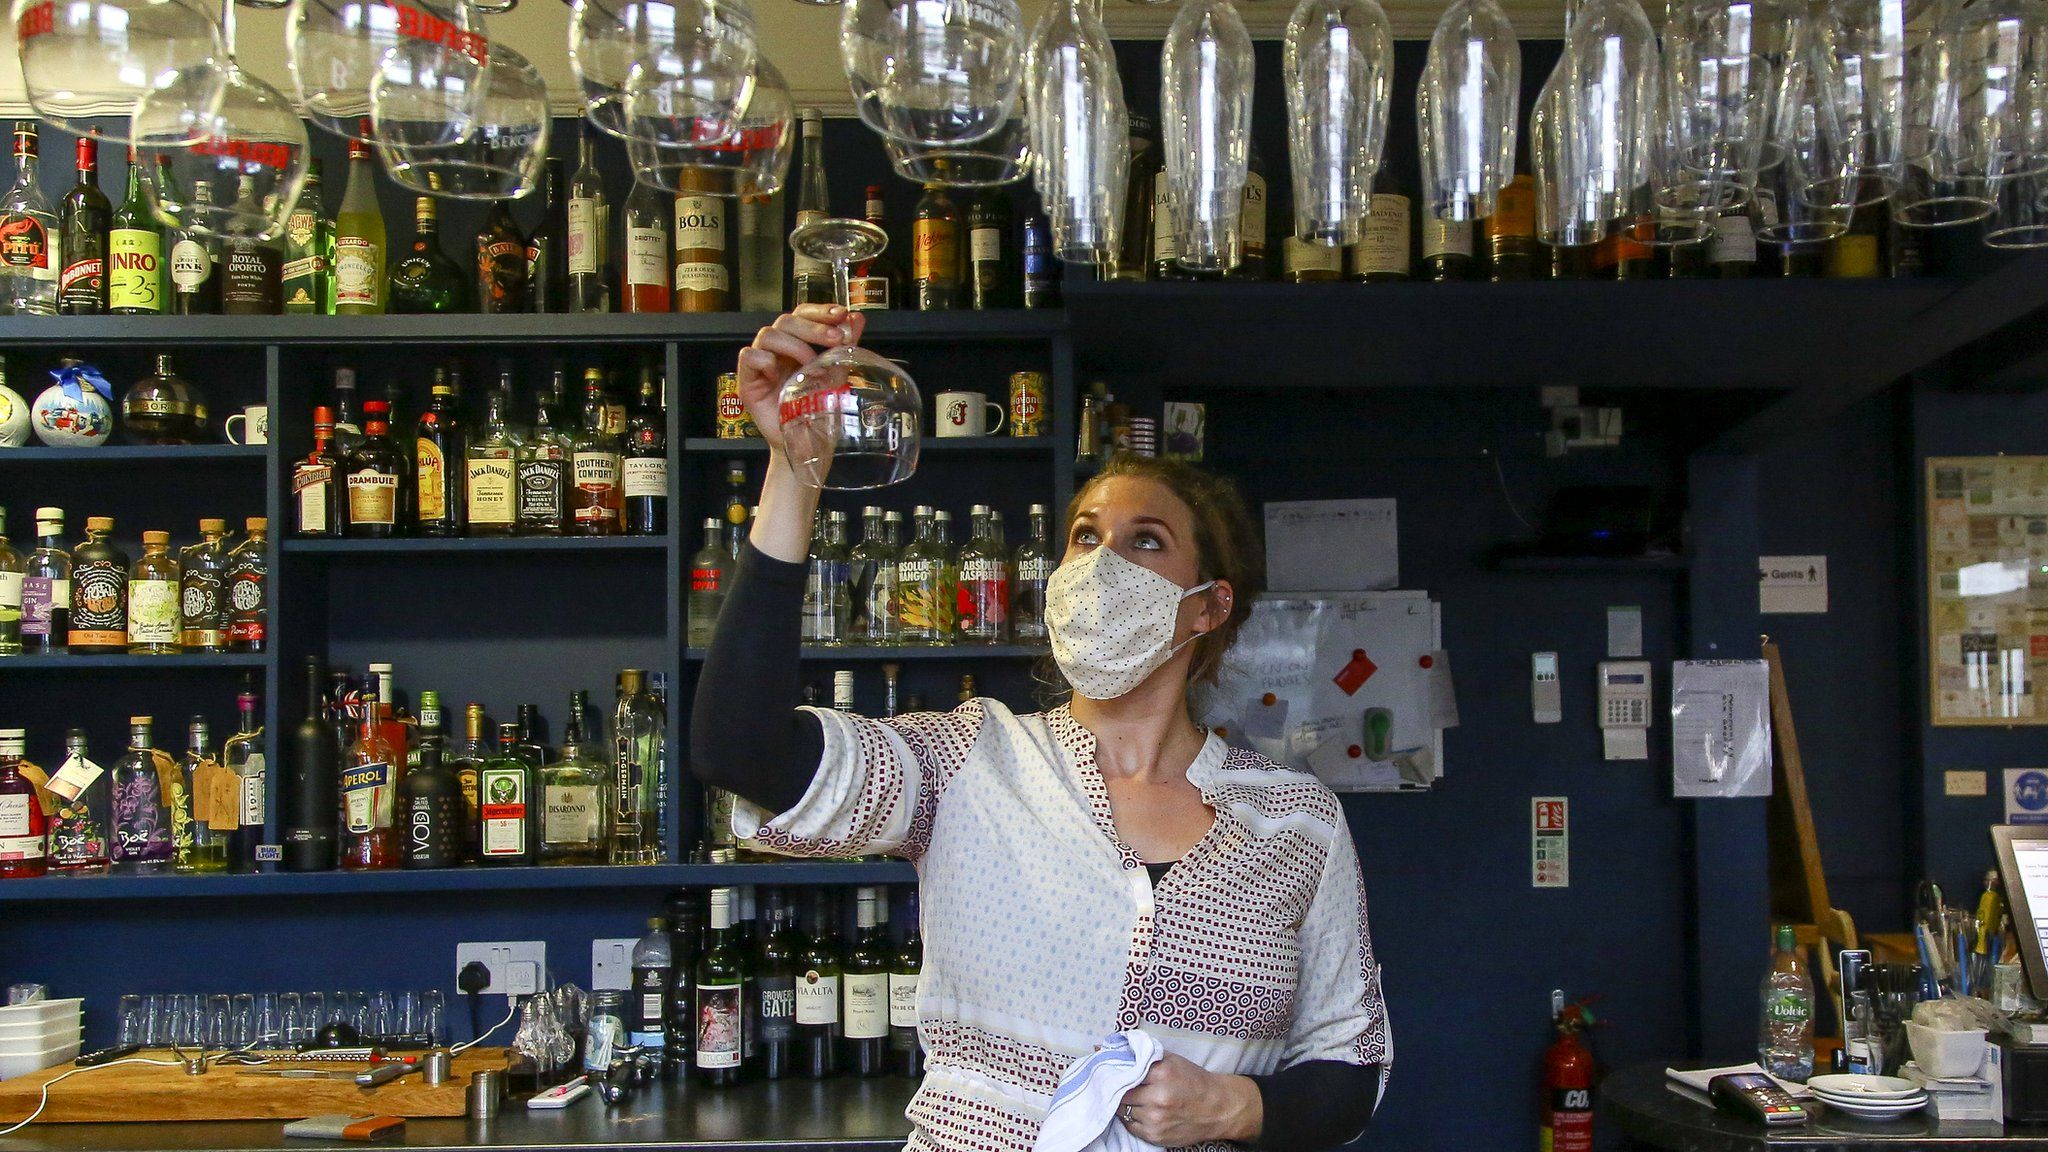 Co-owner of the Banc pub, Holly Adams-Evans, works behind the bar in Knighton